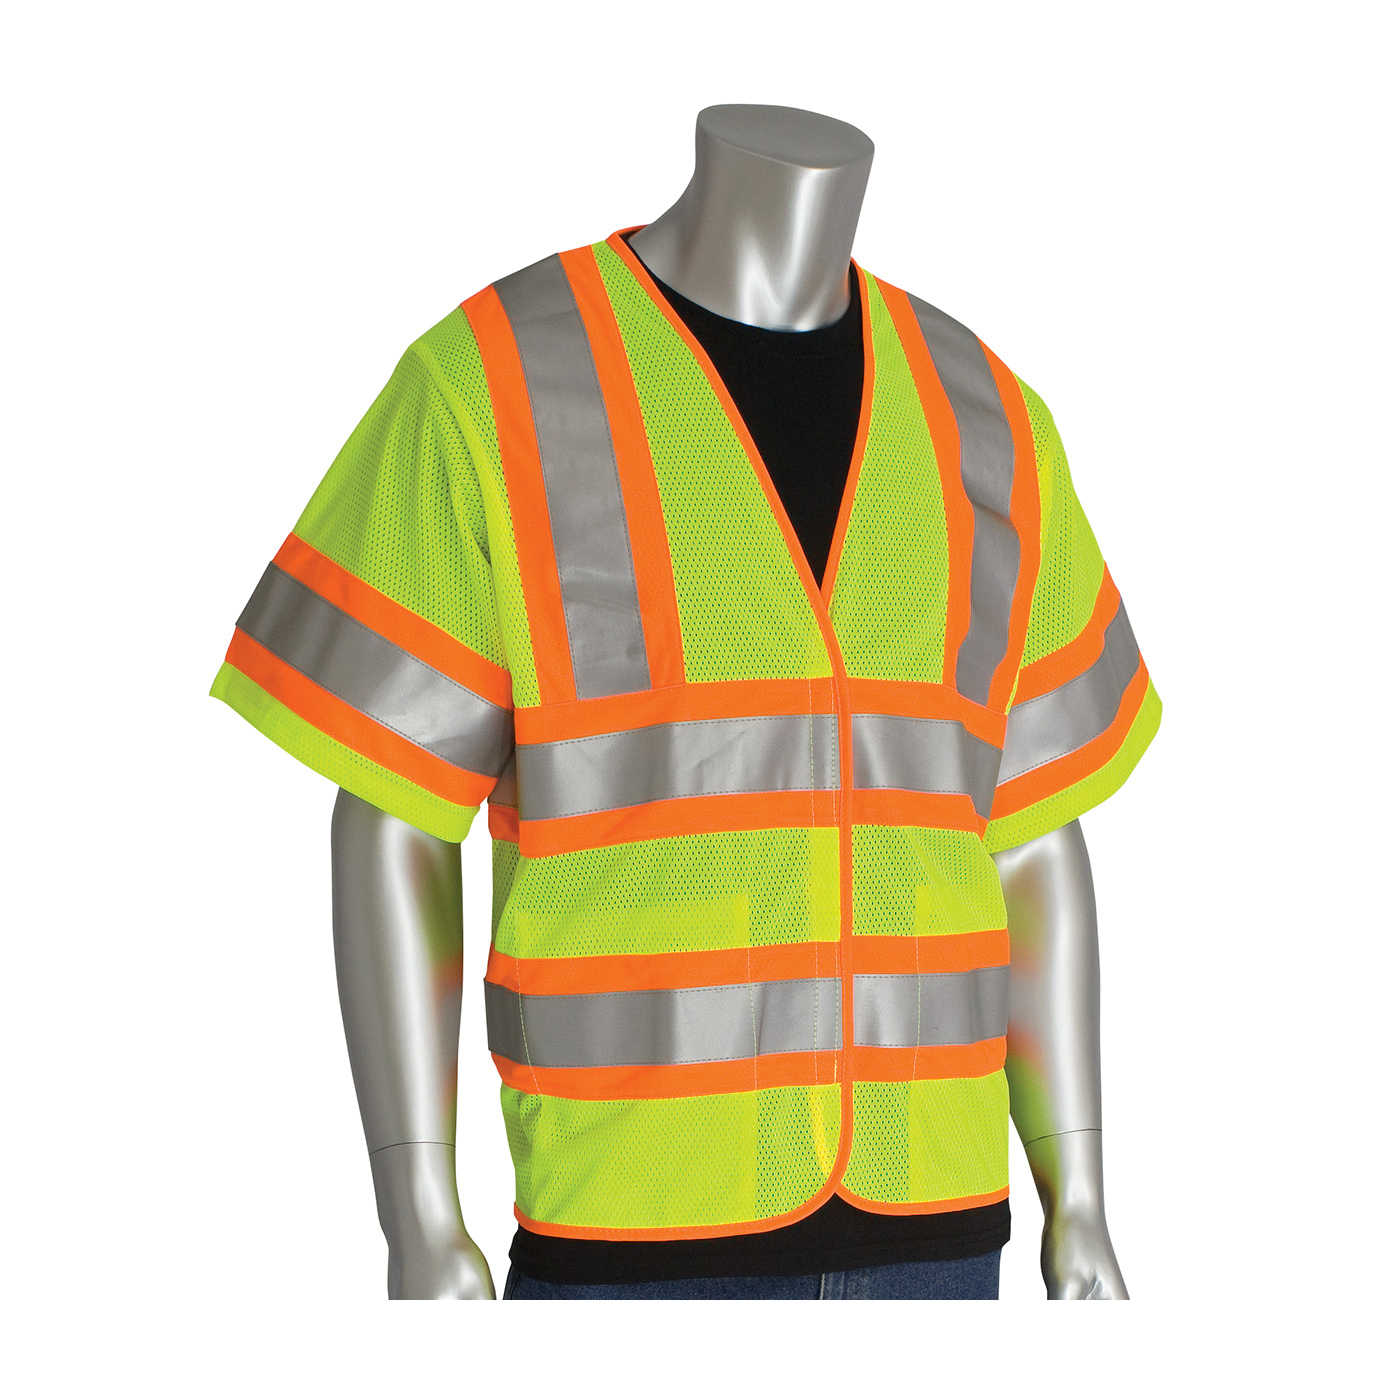 PIP® SafetyGear 305-HSVPFRLY-S/M 2-Tone FR Treated Safety Vest, S to M, Hi-Viz Yellow, Polyester, Hook and Loop Closure, 2 Pockets, ANSI Class: Class 3, ANSI Specified